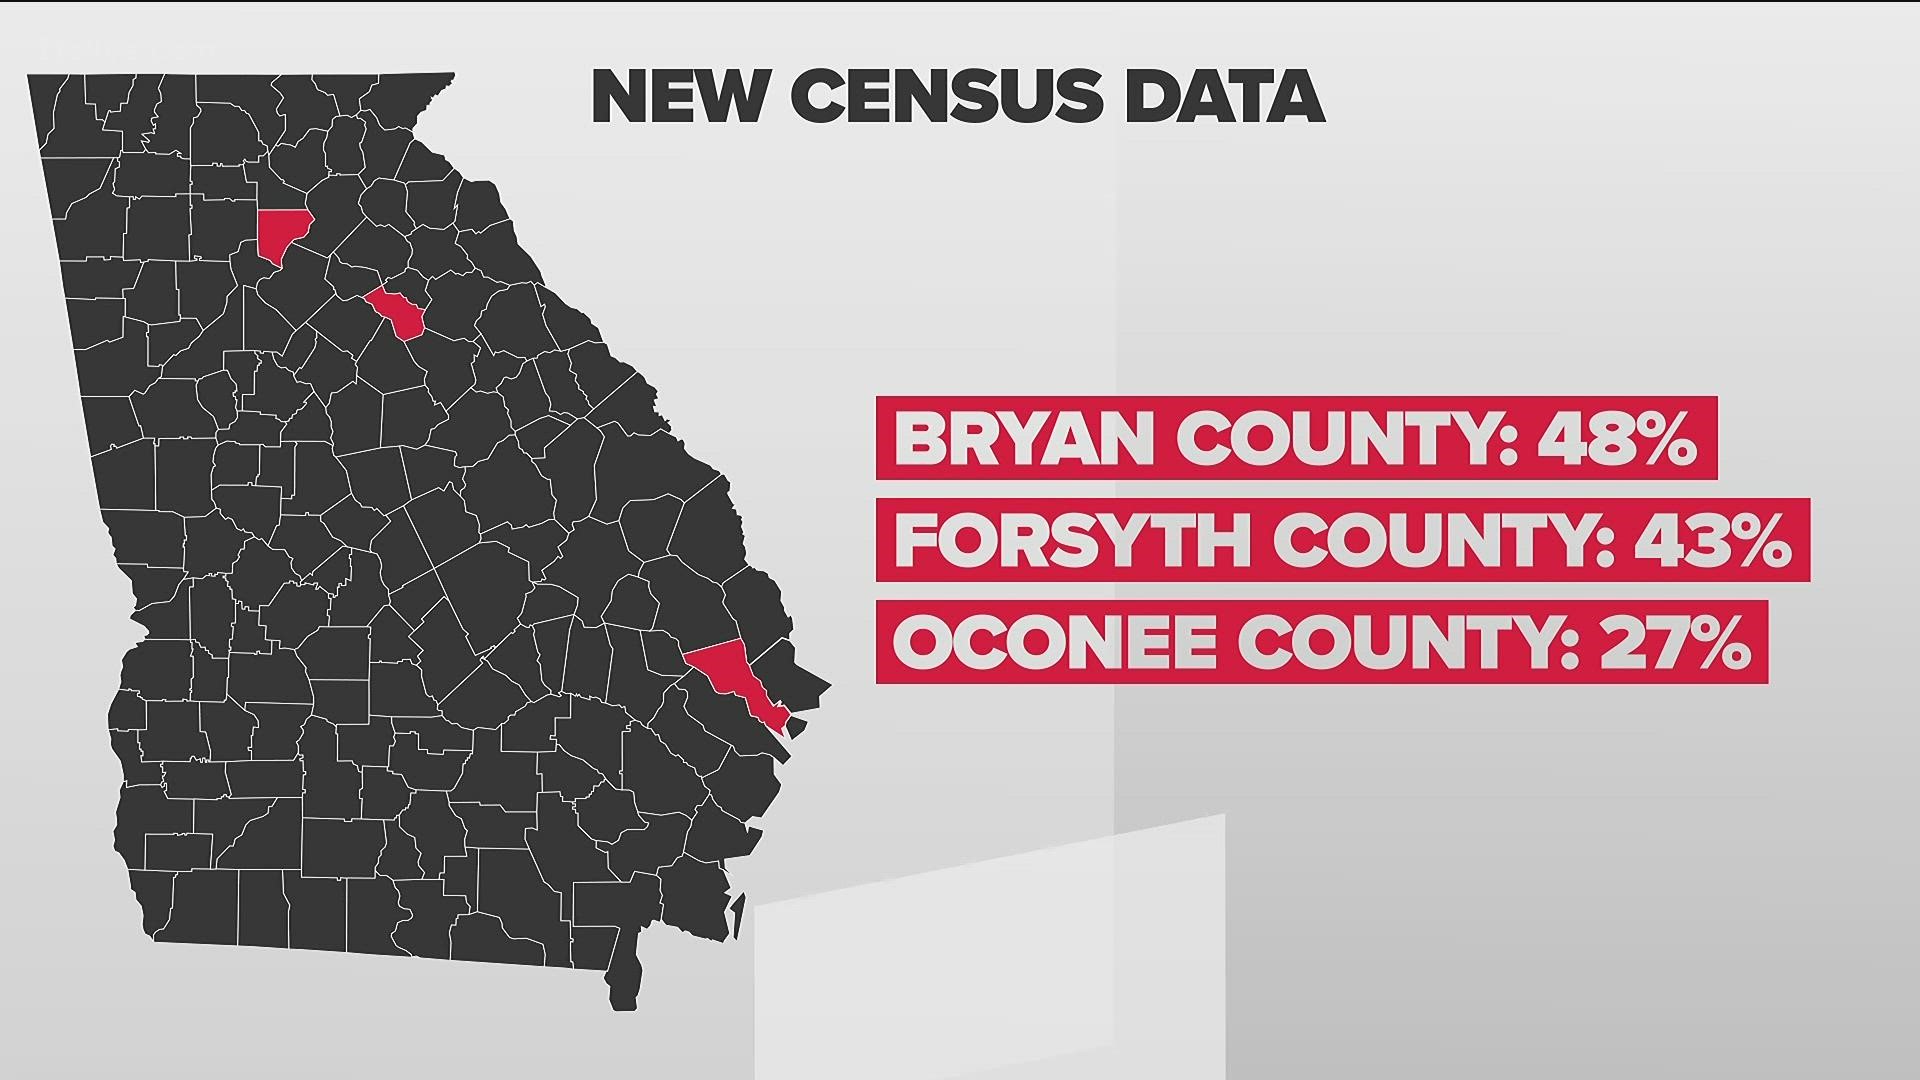 The data gives us a look at how Georgia's population is growing and changing.